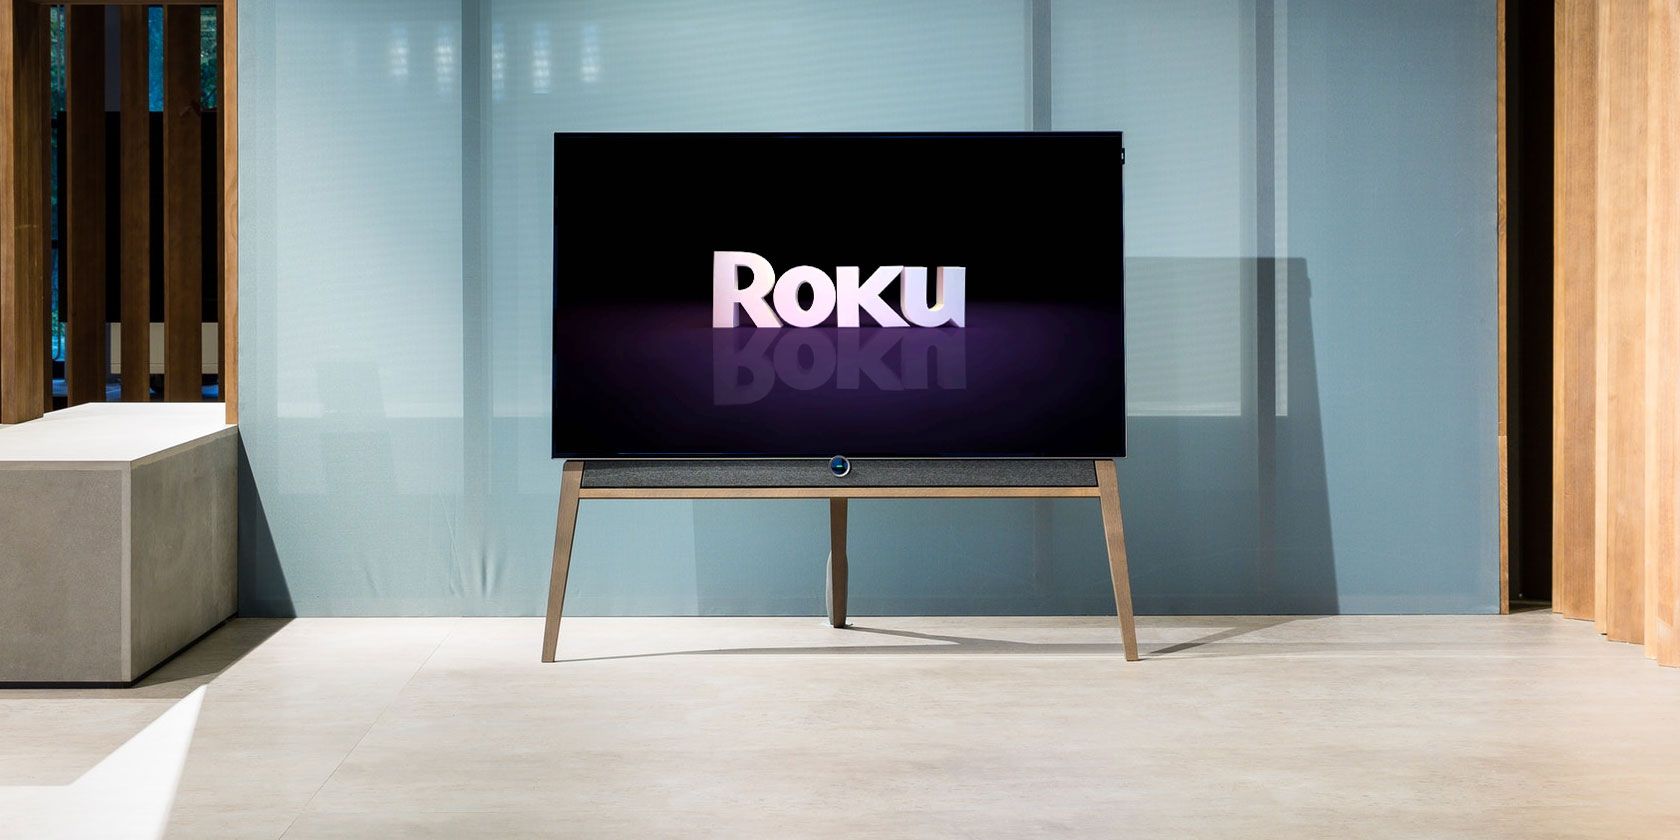 How to Watch Local Channels on Roku for Free: 7 Methods to Try